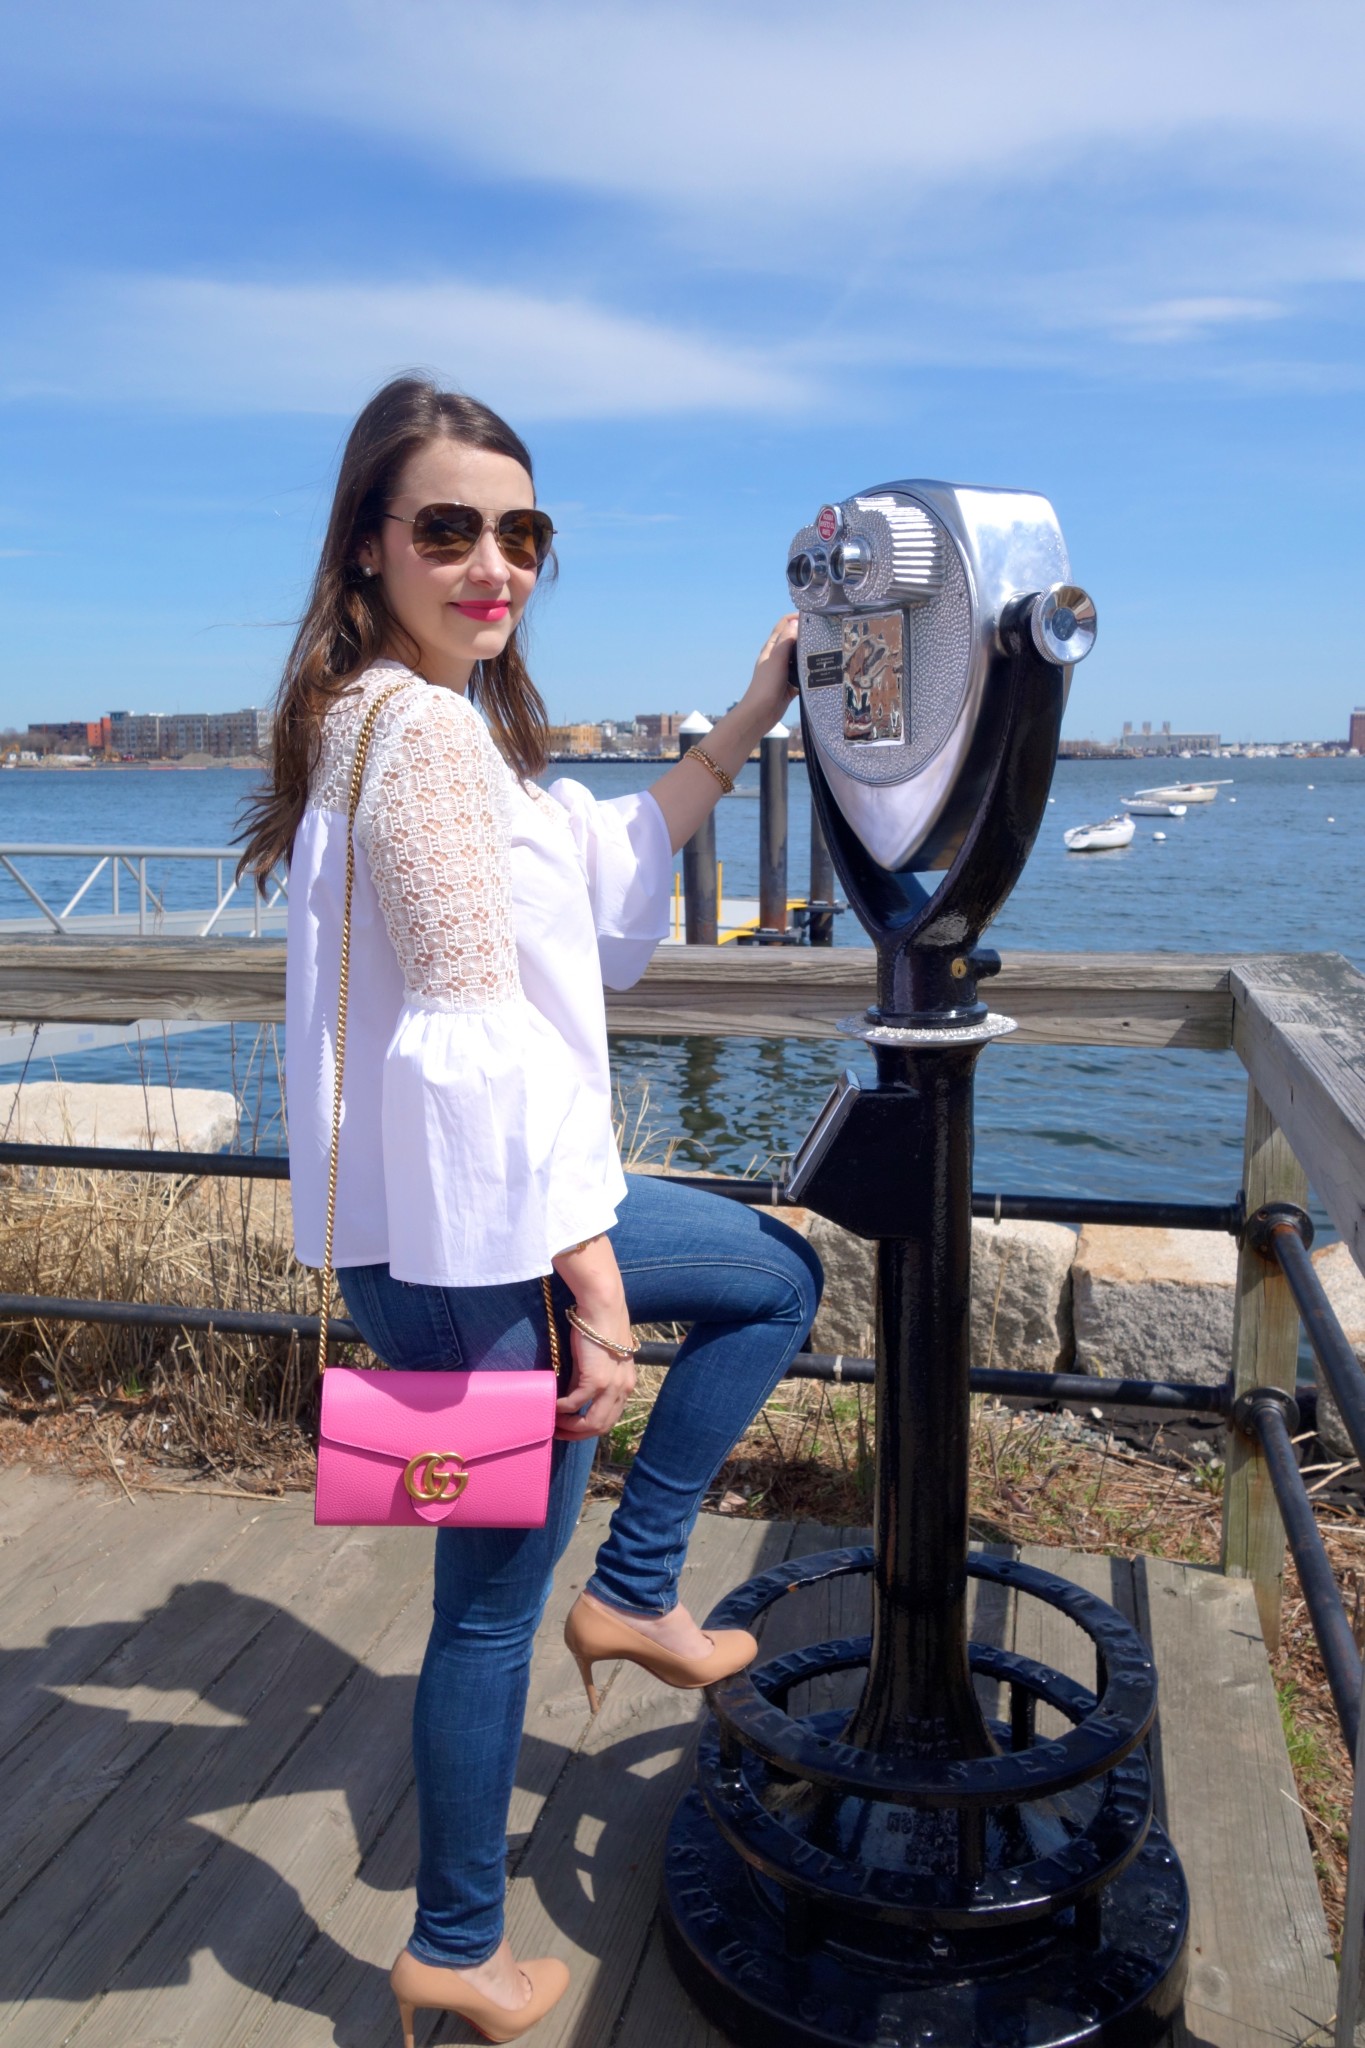 Where to Consign and Buy Designer Consignment in Boston - The A-Lyst: A  Boston-based Lifestyle Blog by Alyssa Stevens